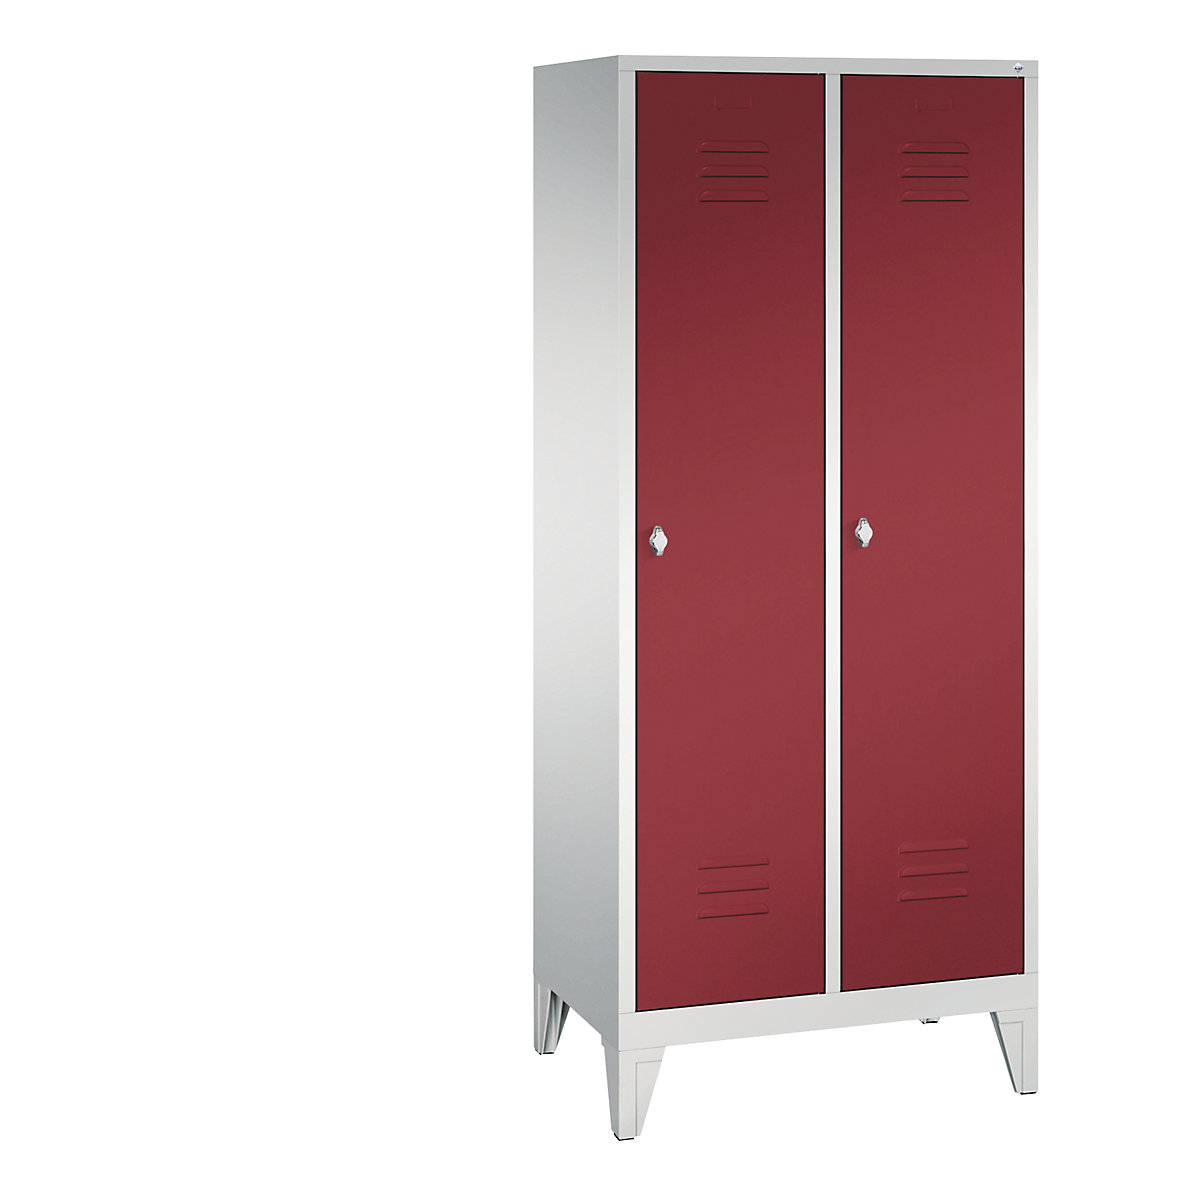 CLASSIC cloakroom locker with feet – C+P, 2 compartments, compartment width 400 mm, light grey / ruby red-5